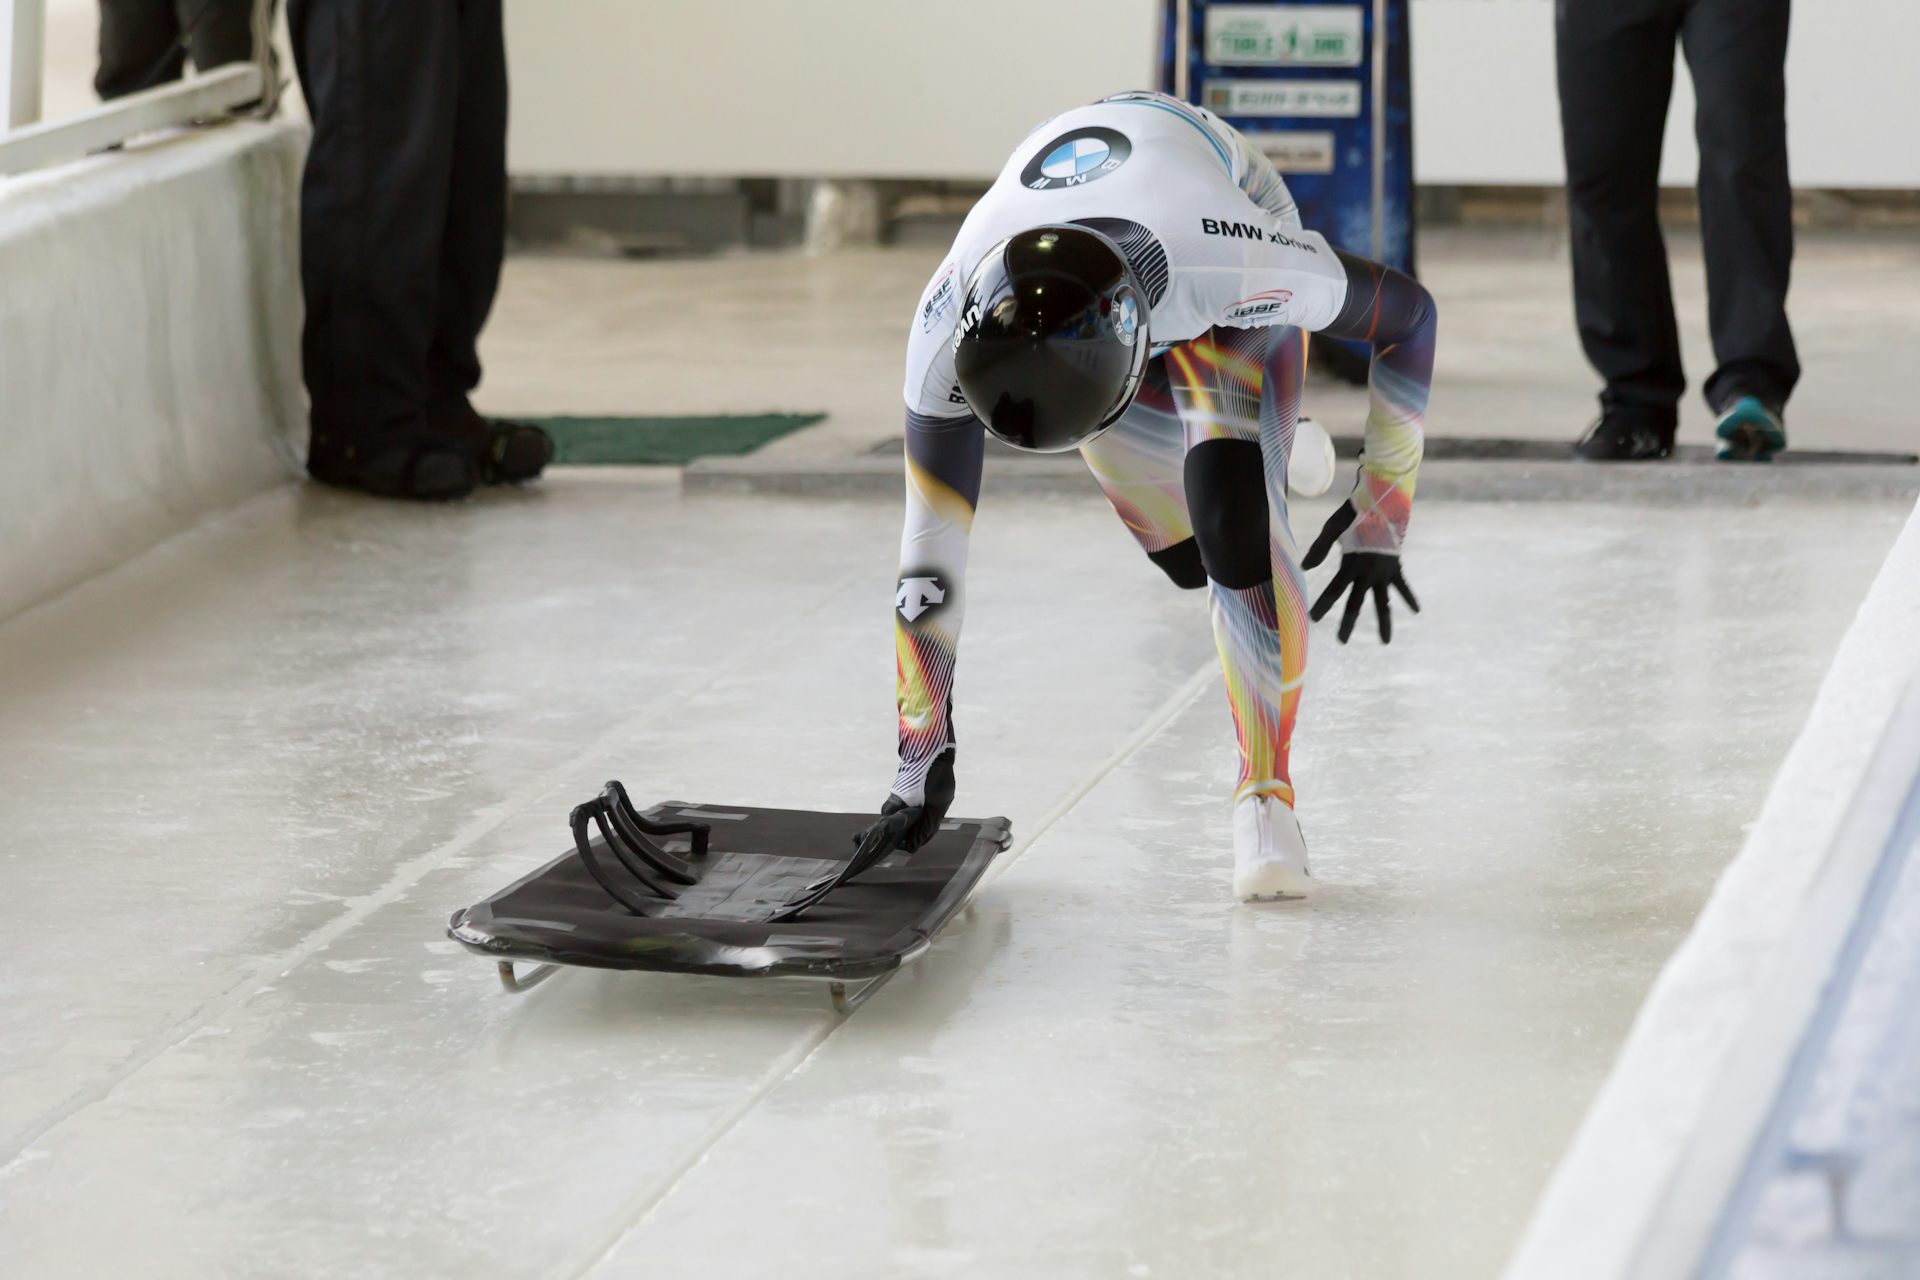 A skeleton racer running with his sled at the start of a race.